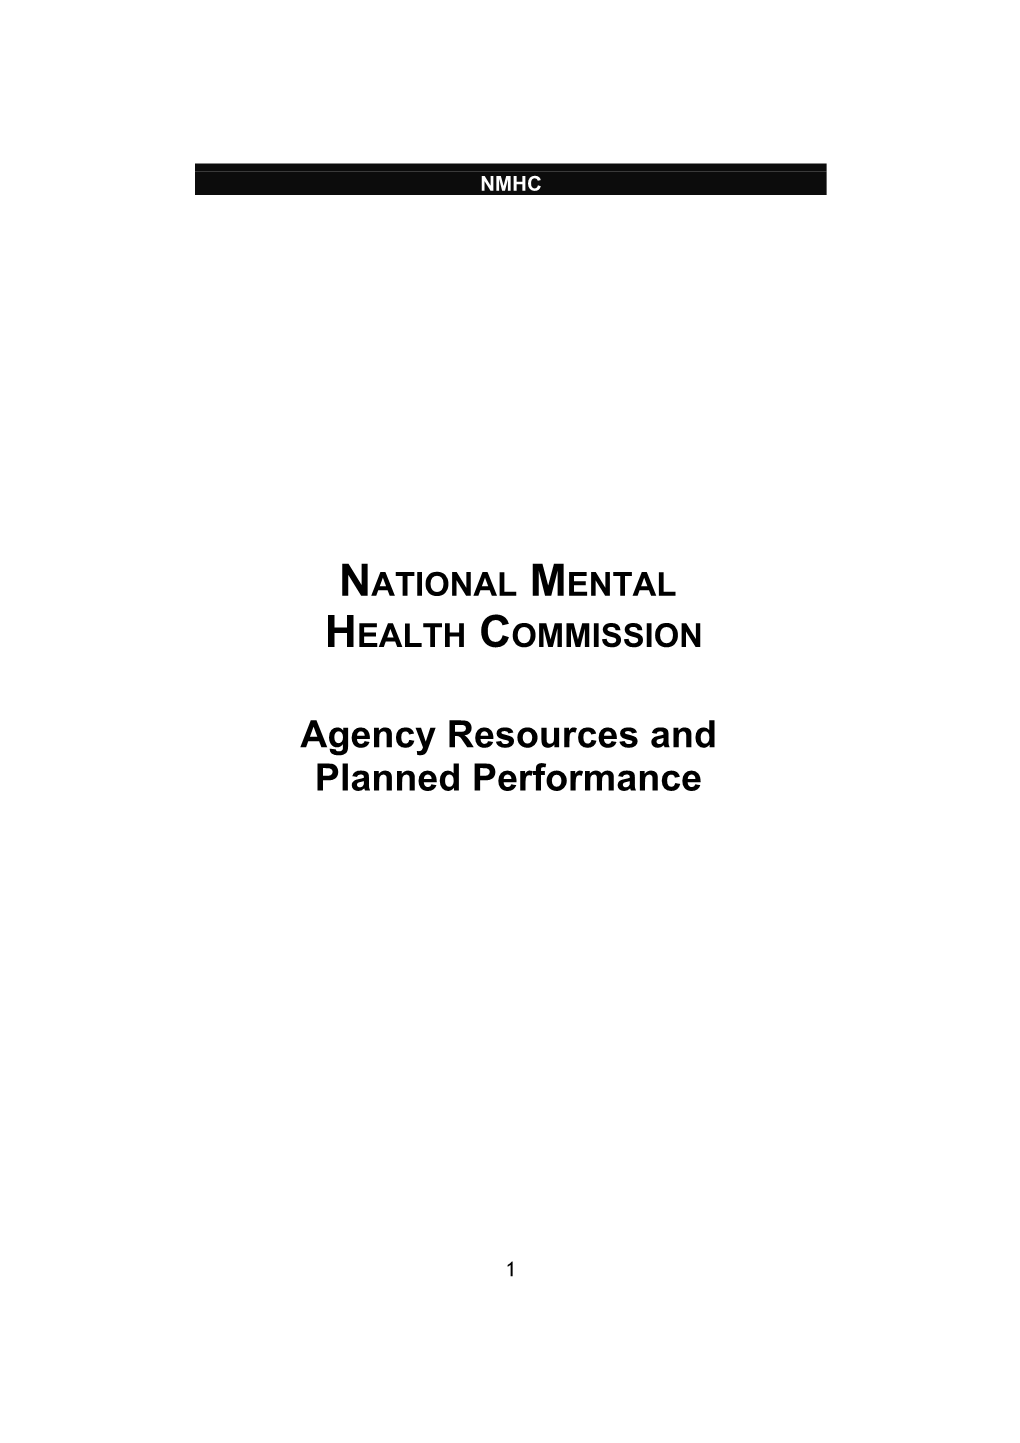 NATIONAL MENTAL HEALTH COMMISSION Agency Resources and Planned Performance